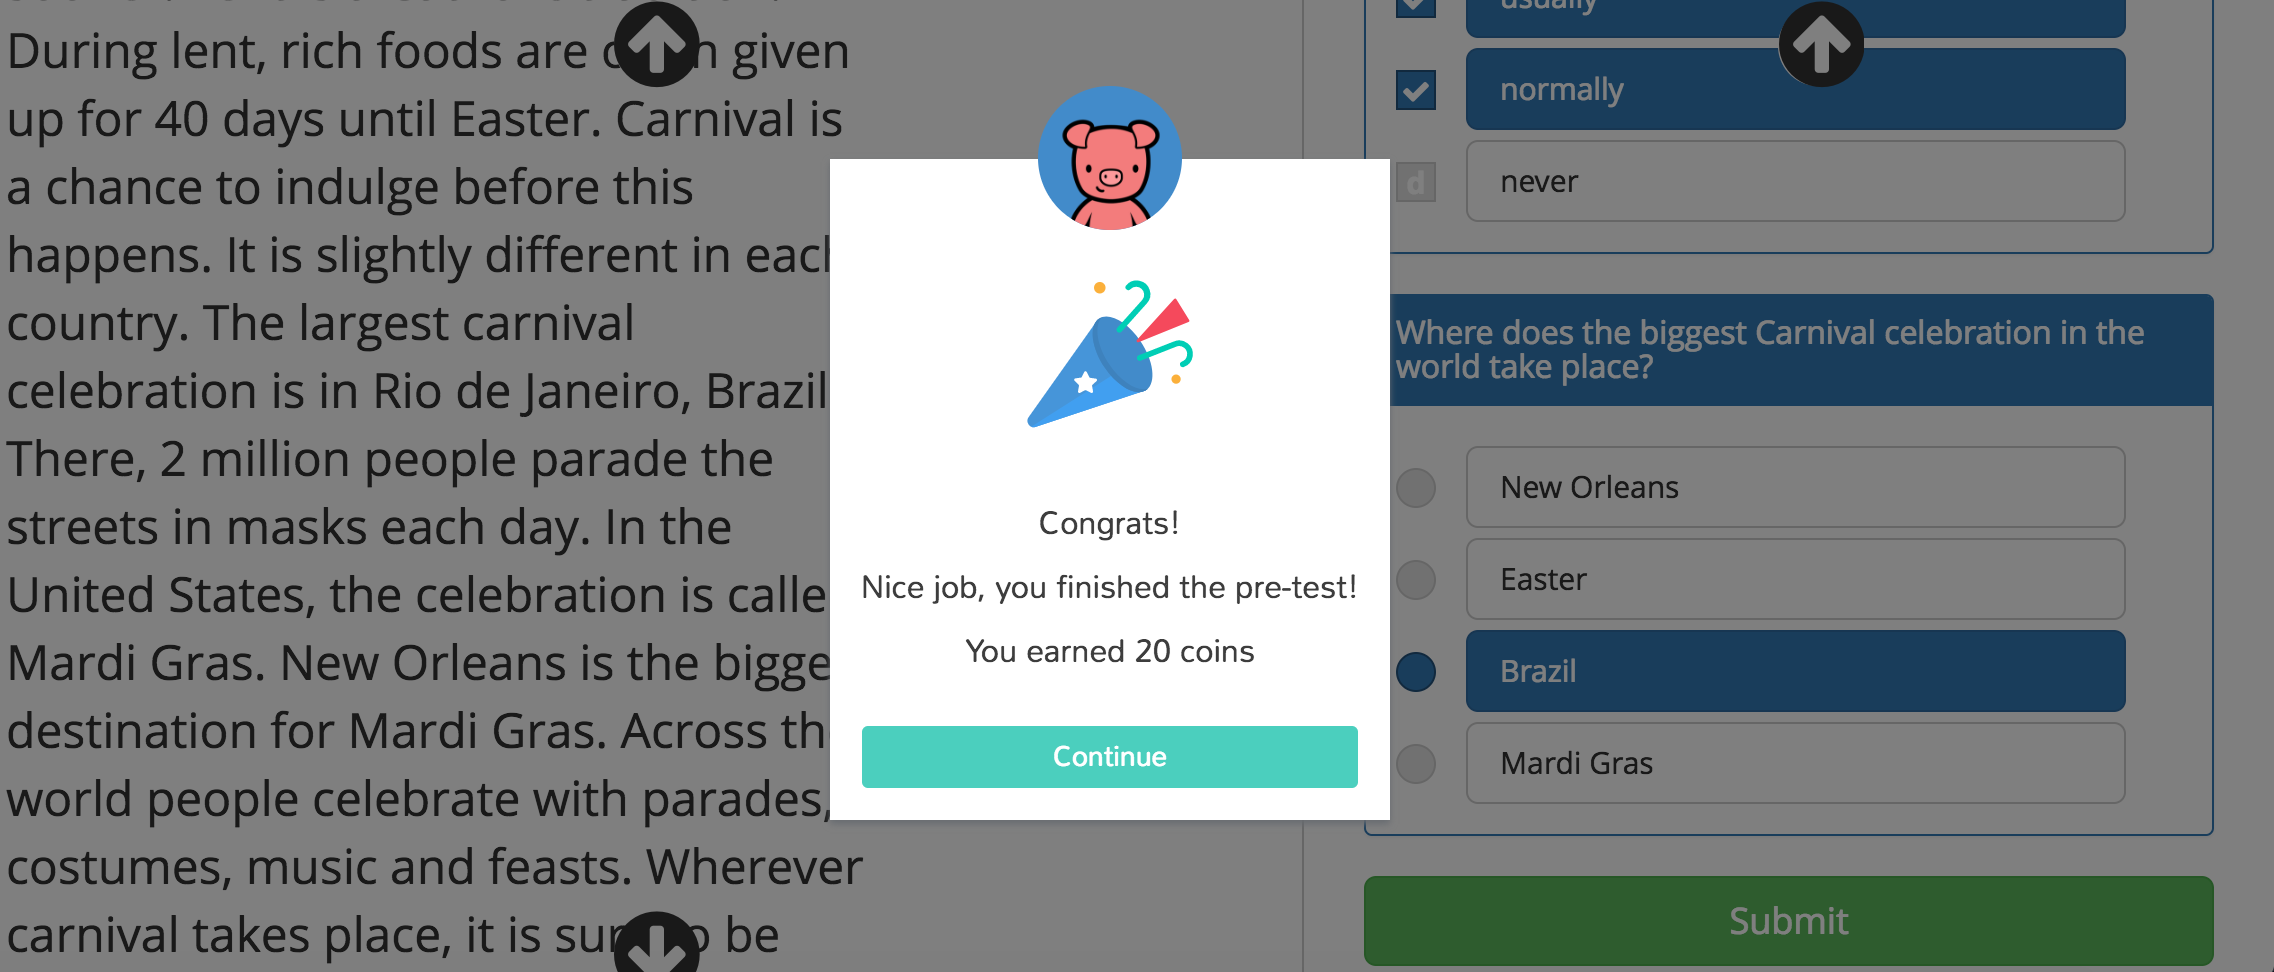 The message says: 'Congrats! Nice job, you finished the pre-test! You earned 20 coins.' The Continue button is at the bottom.